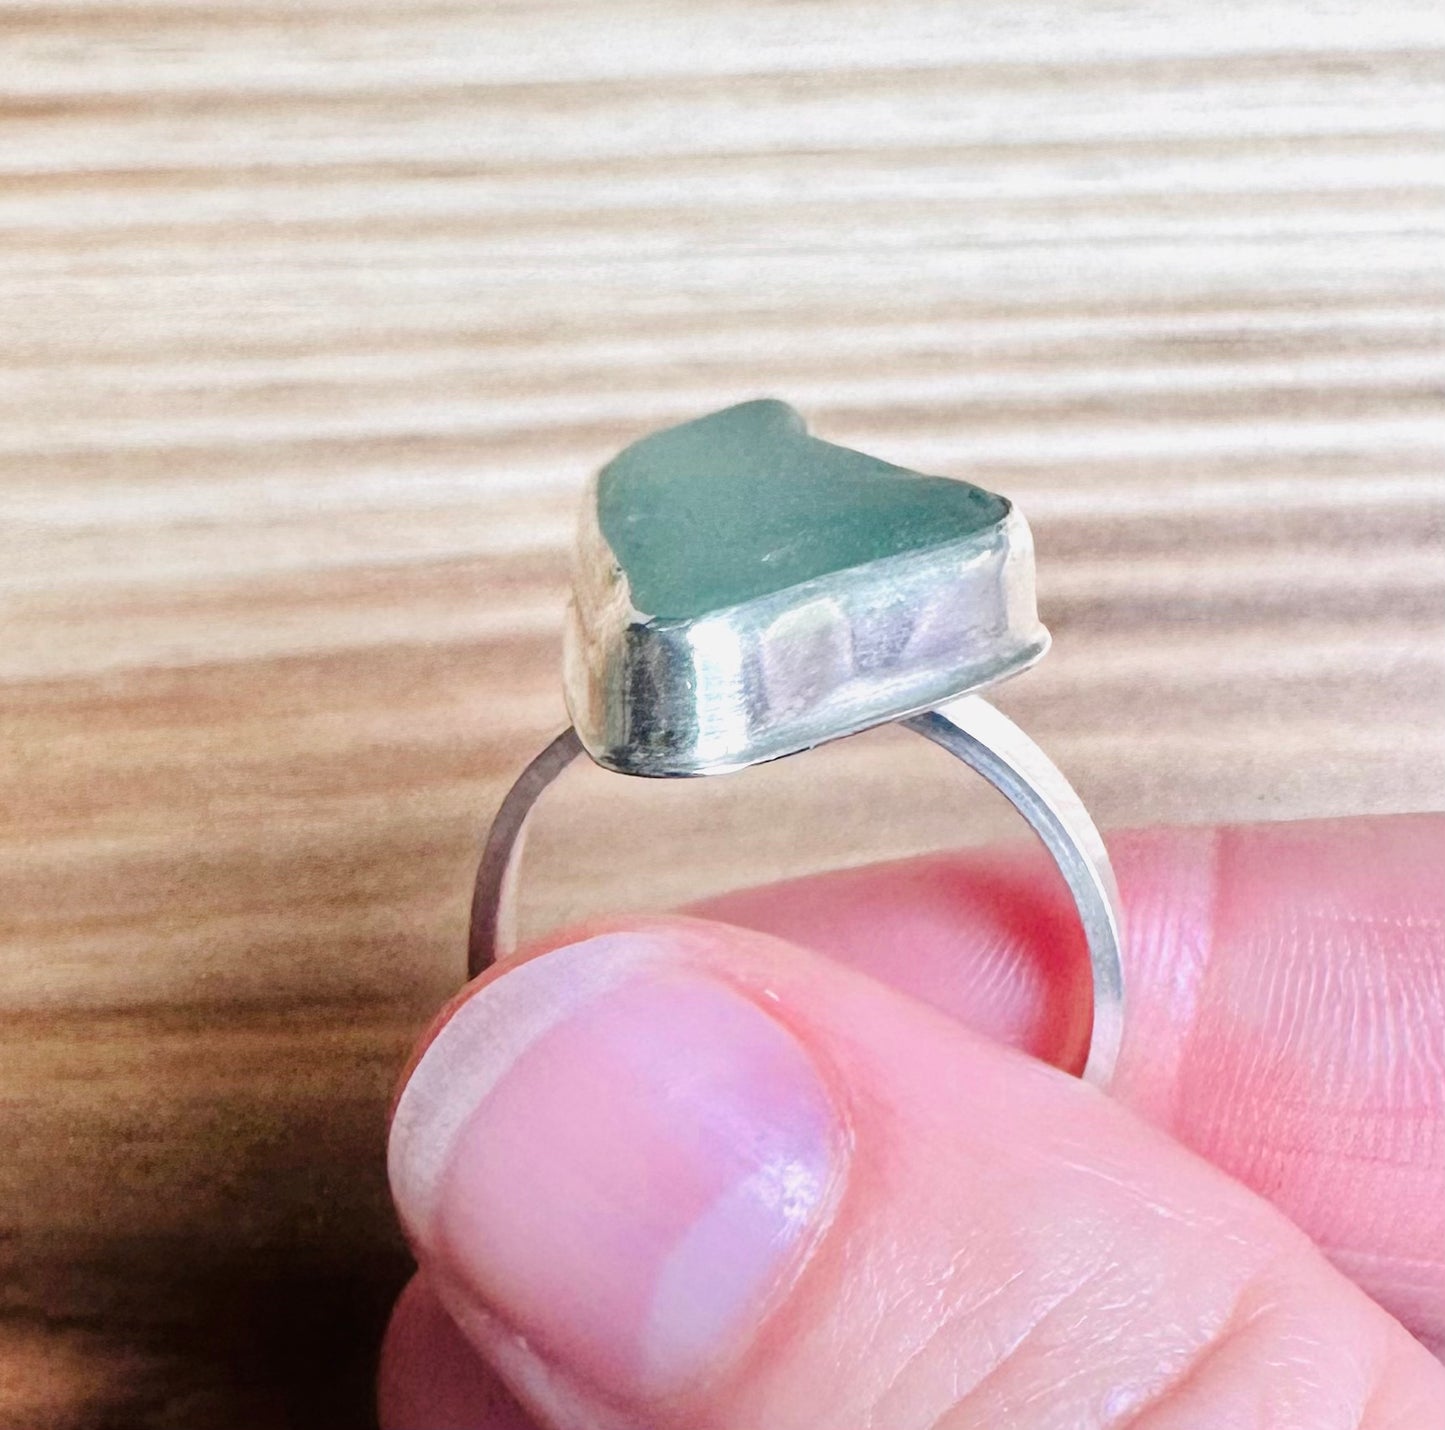 Authentic, Coke Bottle Green Beach Glass and Sterling Silver Ring - Size 8.75